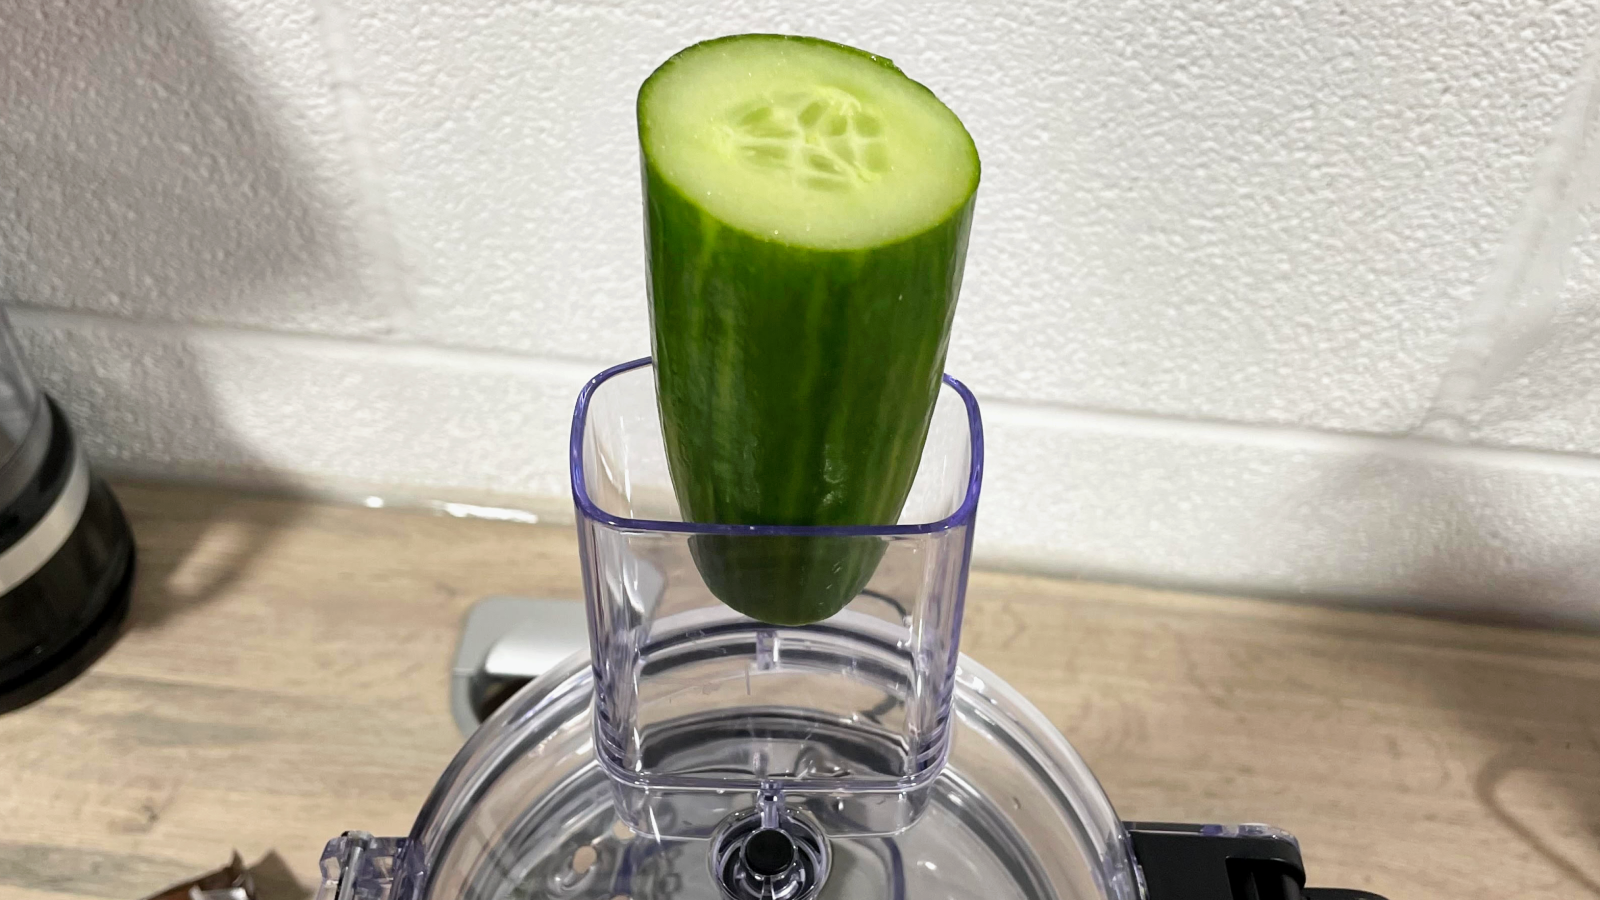 A closeup of the KitchenAid 7 cup food processor feed tube, showing that a larger-diameter cucumber is too large to fit inside.